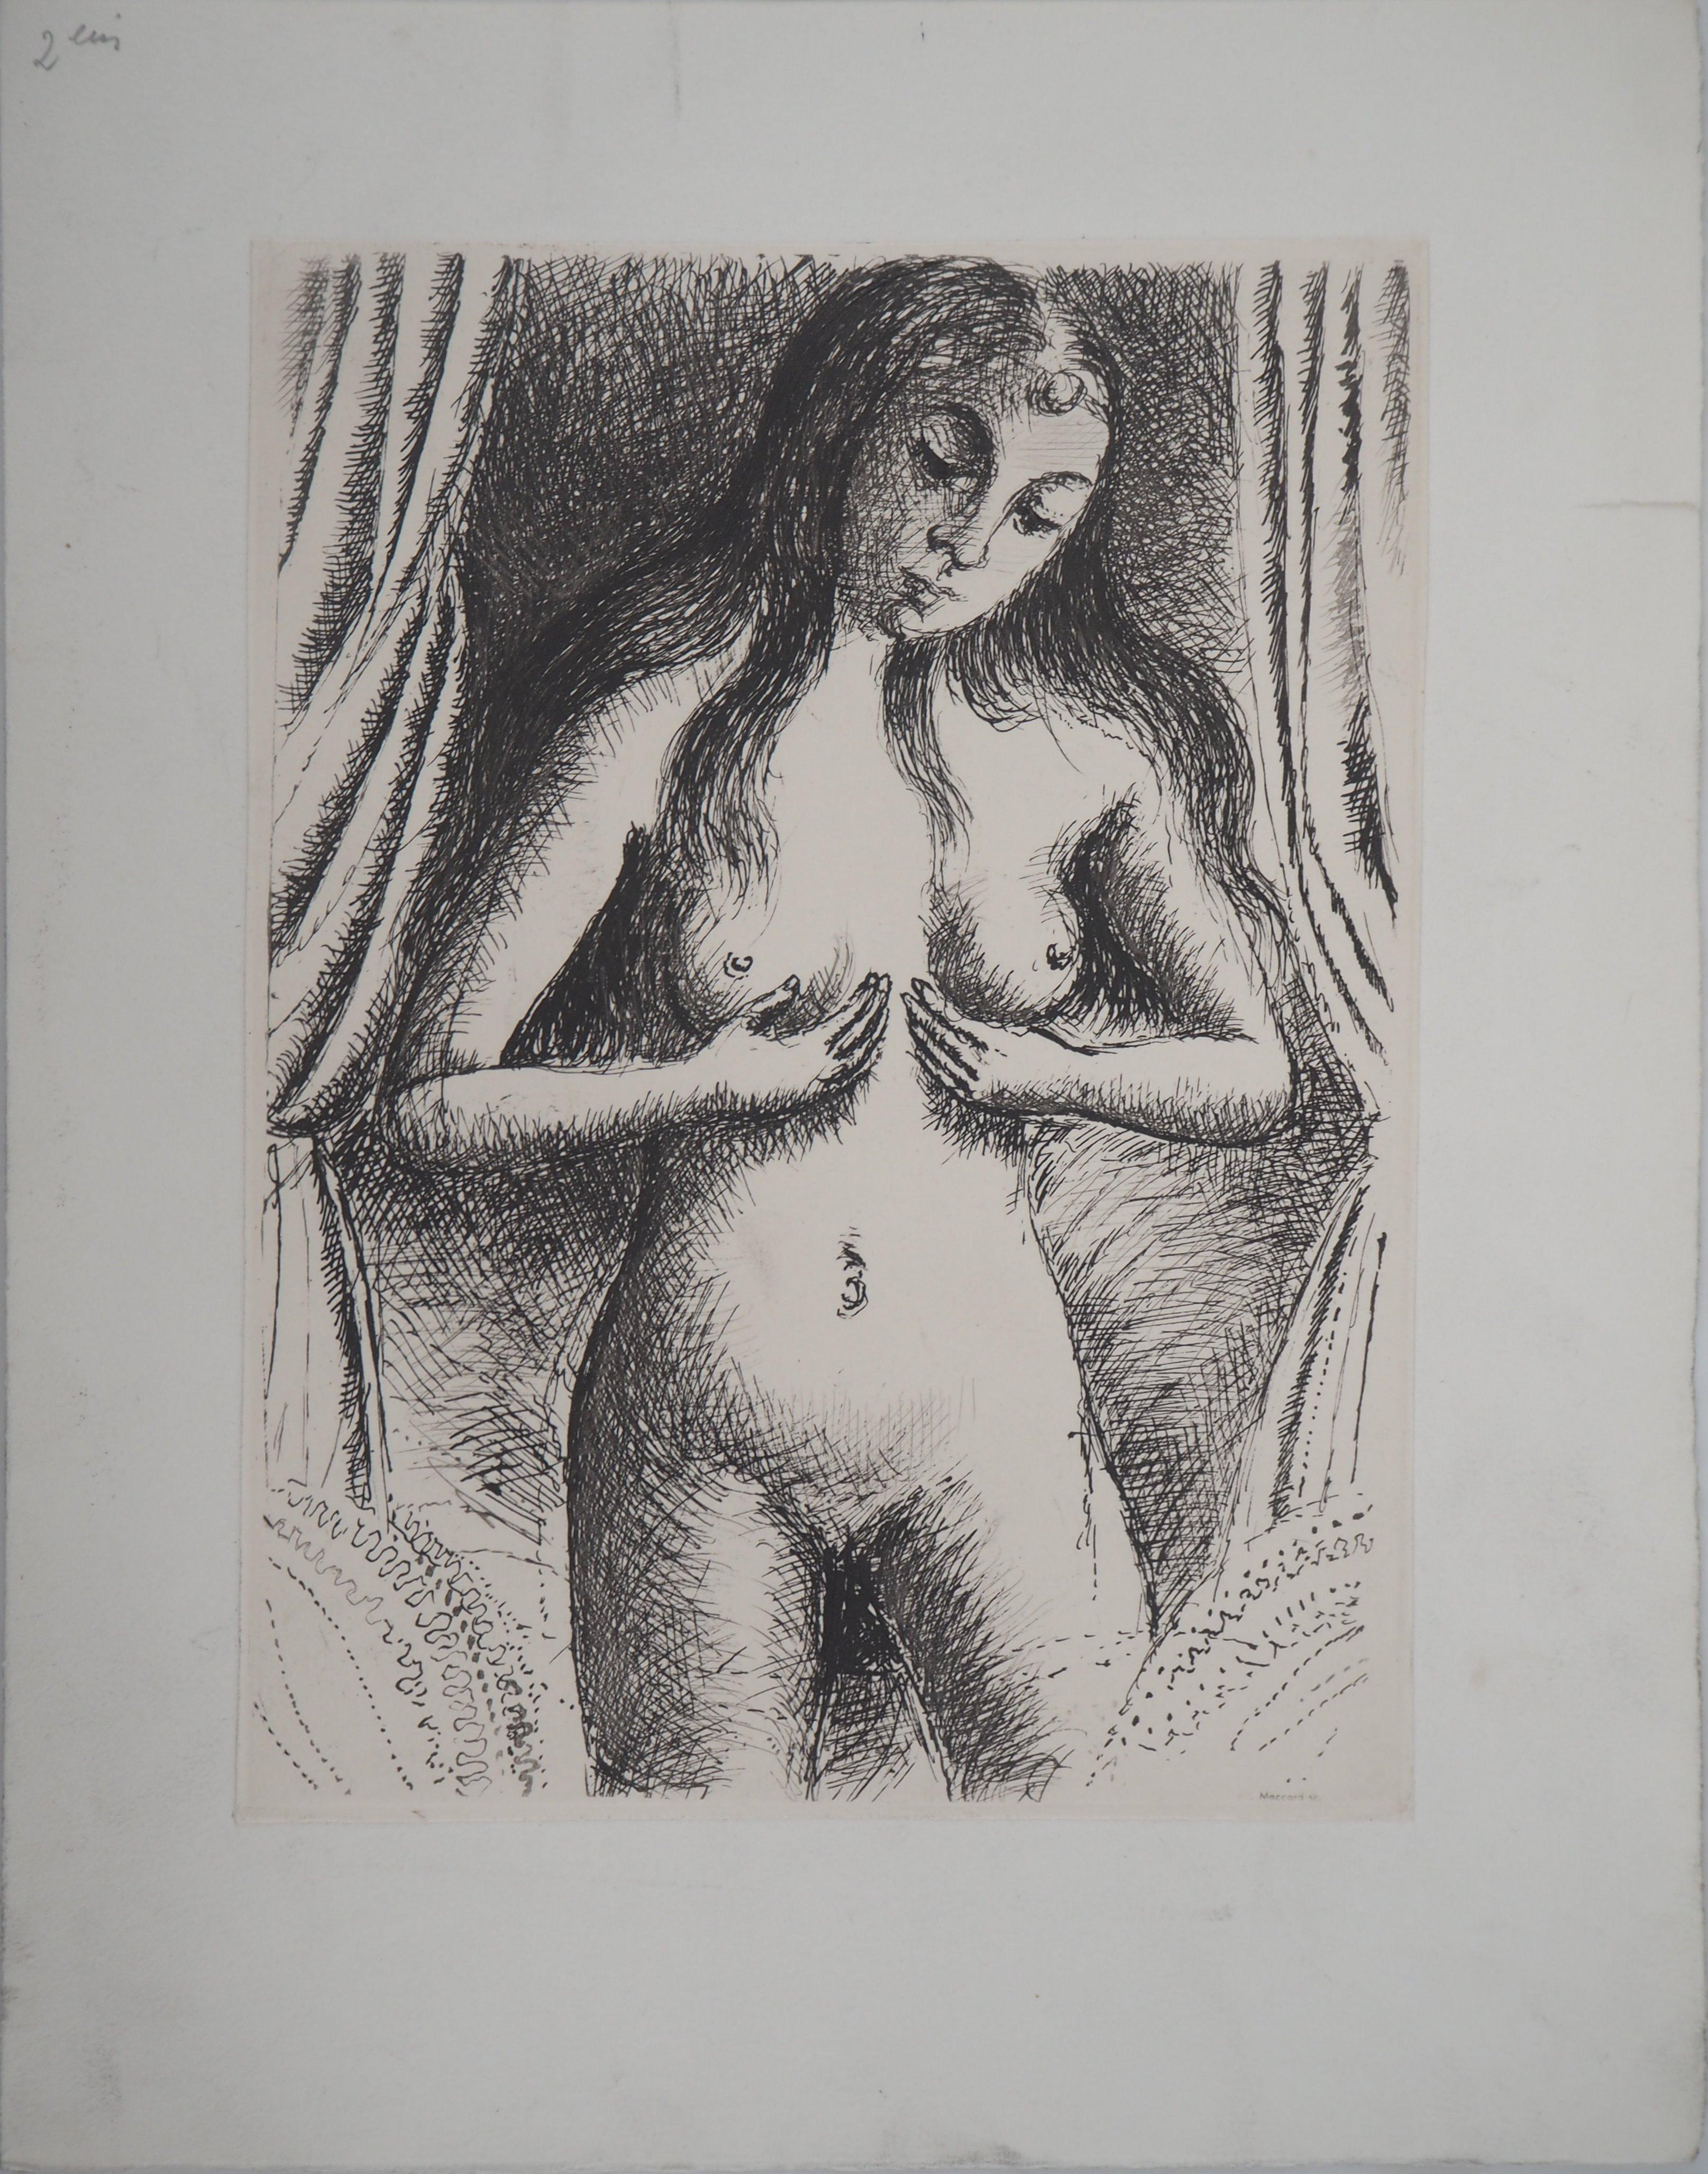 Desire - Etching - 1970 - Print by Paul Delvaux